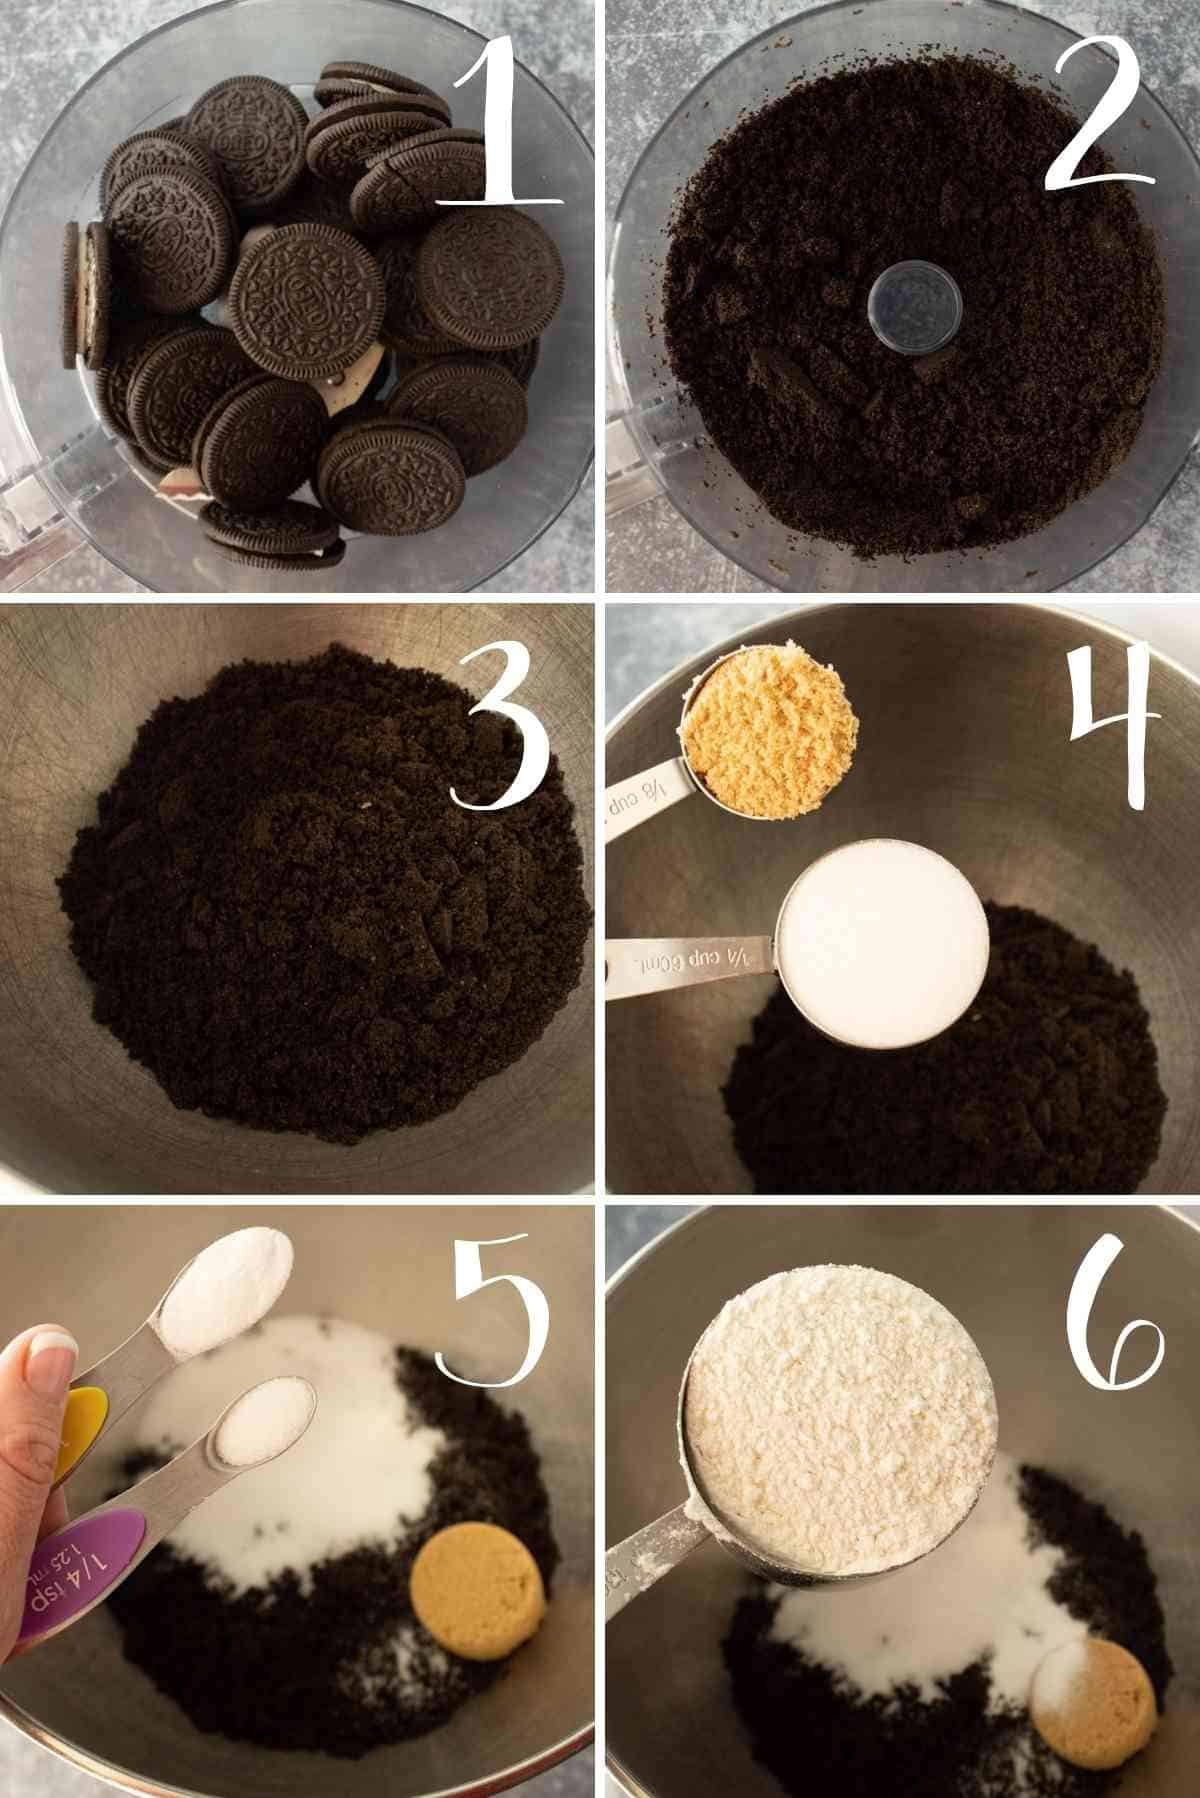 Crushing the oreos to crumbs following by adding them to a bowl with the other dry ingredients.